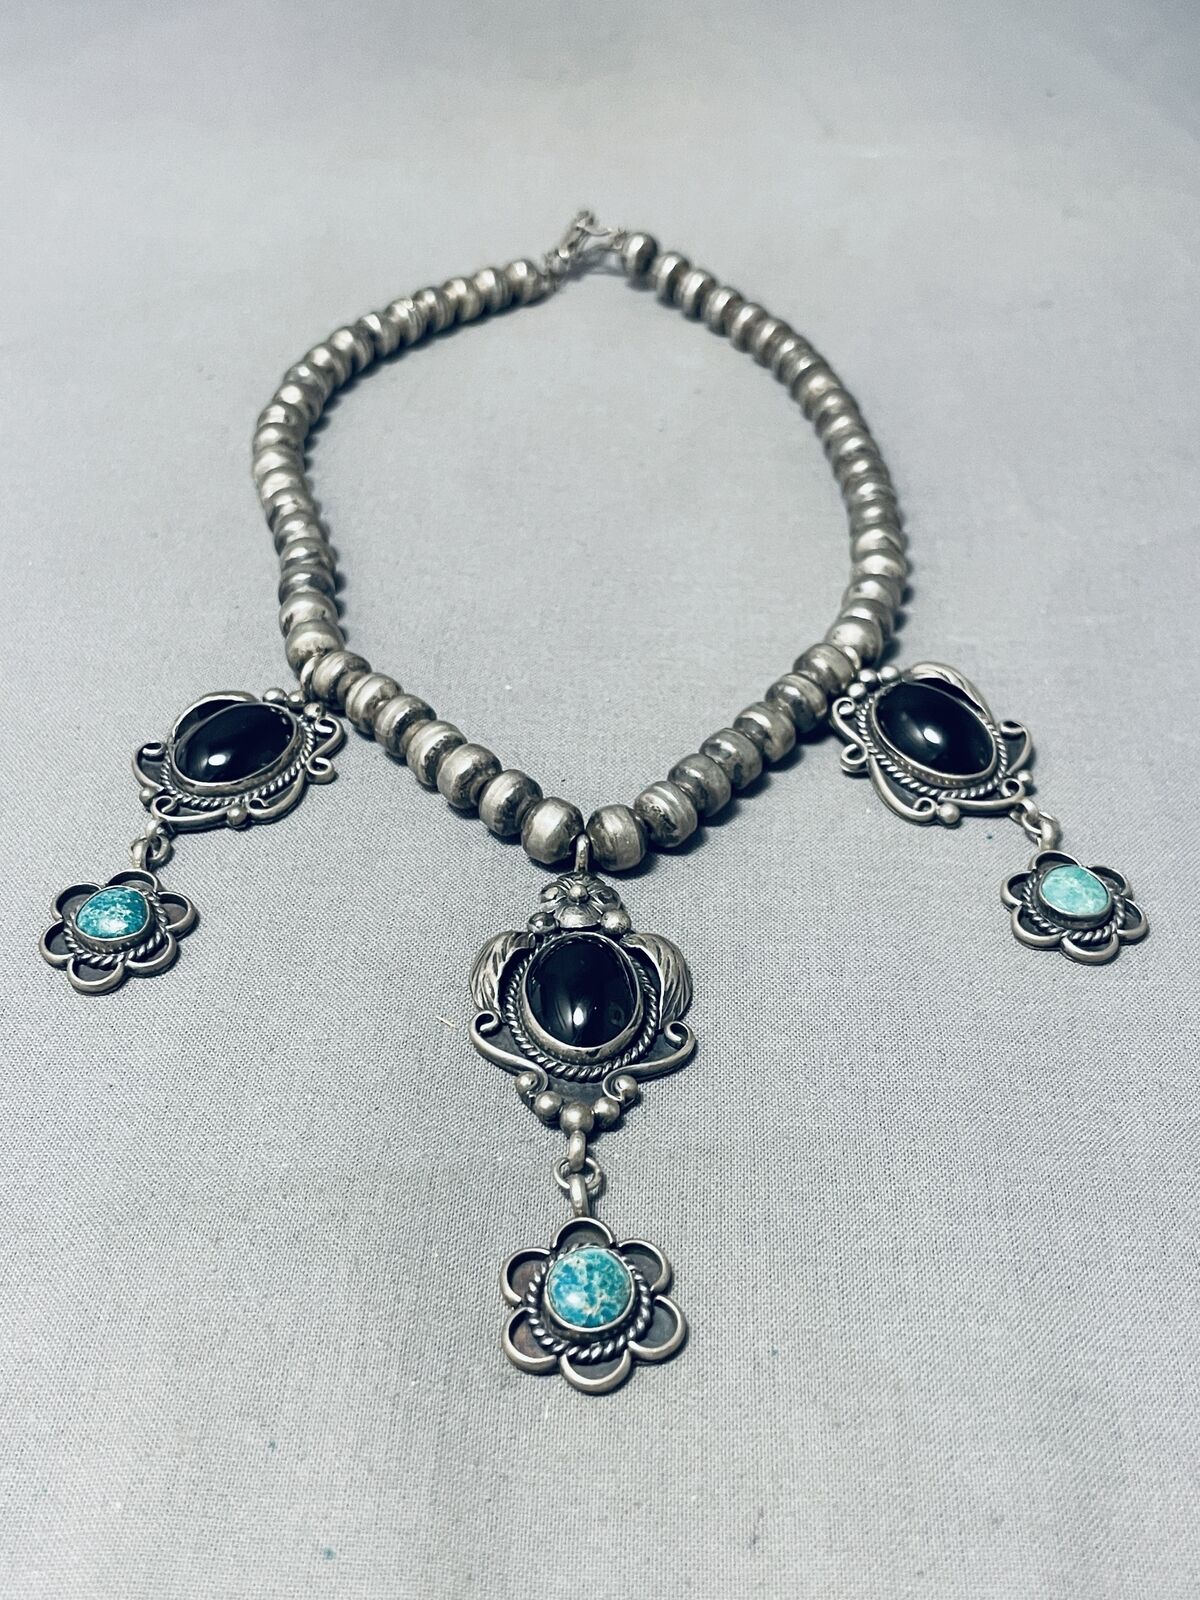 AMAZING VINTAGE NAVAJO BLACK ONYX & TURQUOISE STERLING SILVER NECKLACE